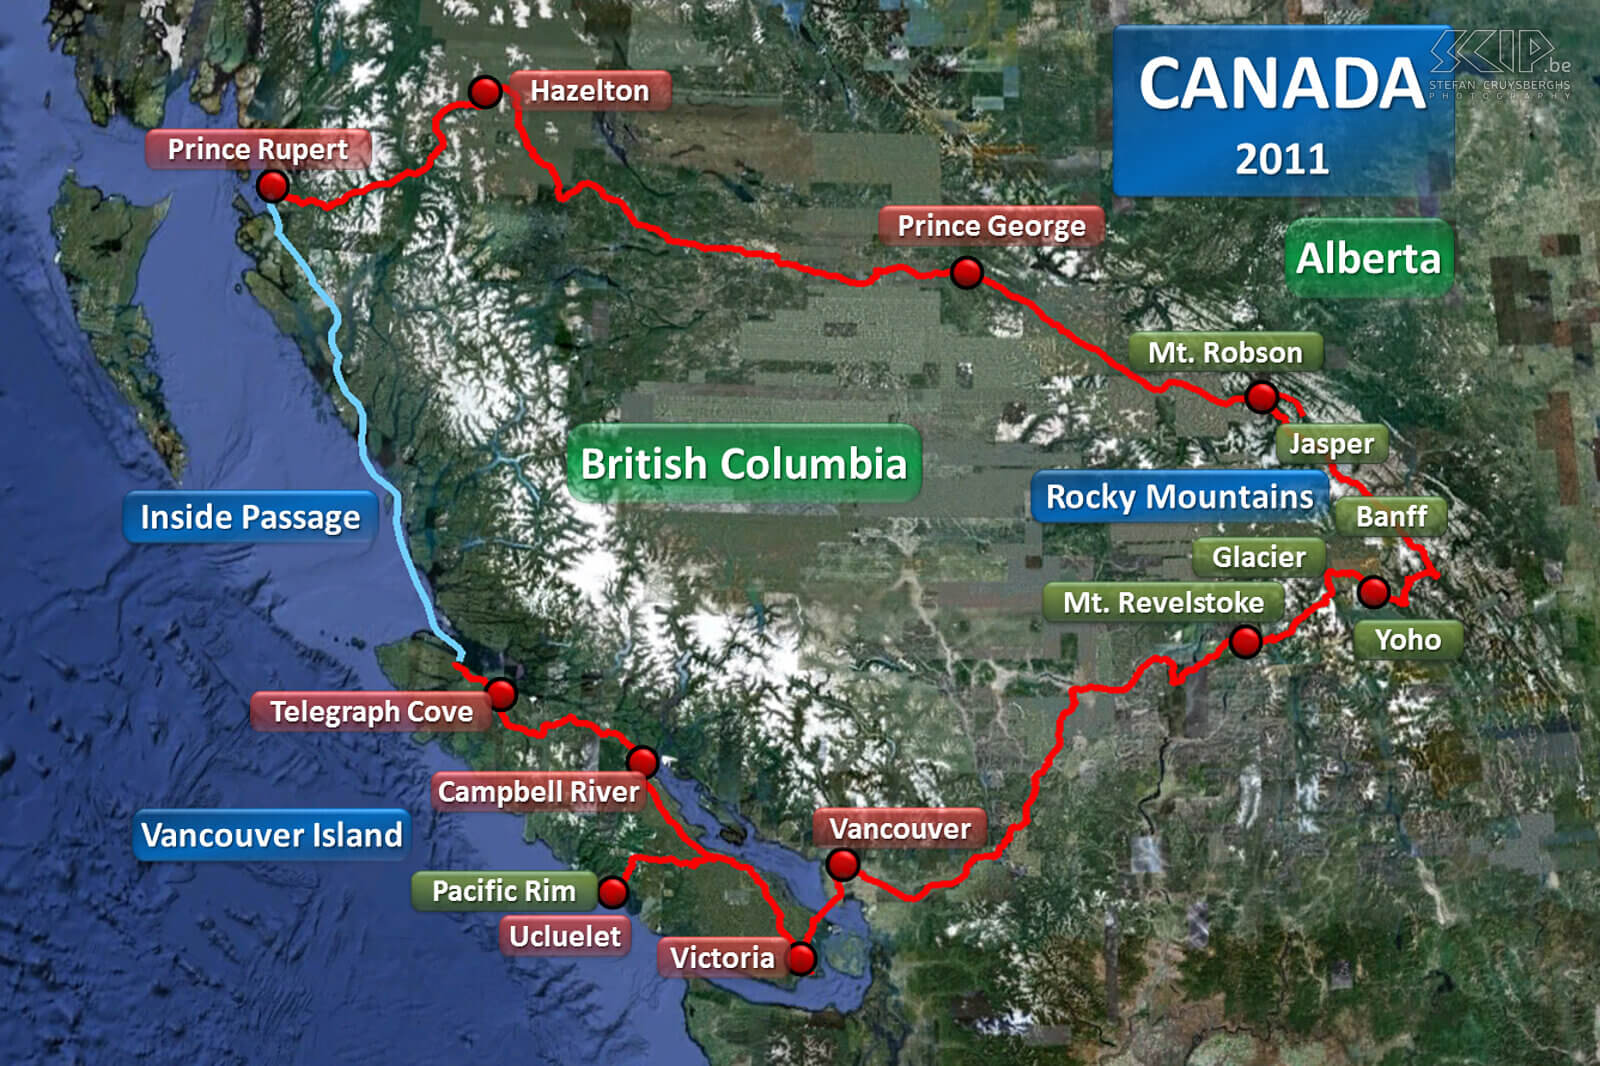 British Columbia & Alberta: travel route From mid-August 2011 I spent 4 weeks travelling through the states of British Columbia and Alberta in western Canada with friends. In the beautiful Rocky Mountains we did several hikes along snowy mountains, azure blue lakes, rivers, high waterfalls and glaciers. Regulary we spotted wildlife like deer, black bears, squirrels, ... <br />
<br />
Through Indian territory we drove to the west coast where we took the ferry through the fjords and remote islands of the Inside Passage. On Vancouver Island we explored the rugged beaches and impressive rainforests and took multiple sea trips to observe orcas, whales, sea lions and bald eagles. The highlights were the encounters with grizzly bears during the annual salmon run. We ended our trip in the cities of Victoria and Vancouver. Stefan Cruysberghs